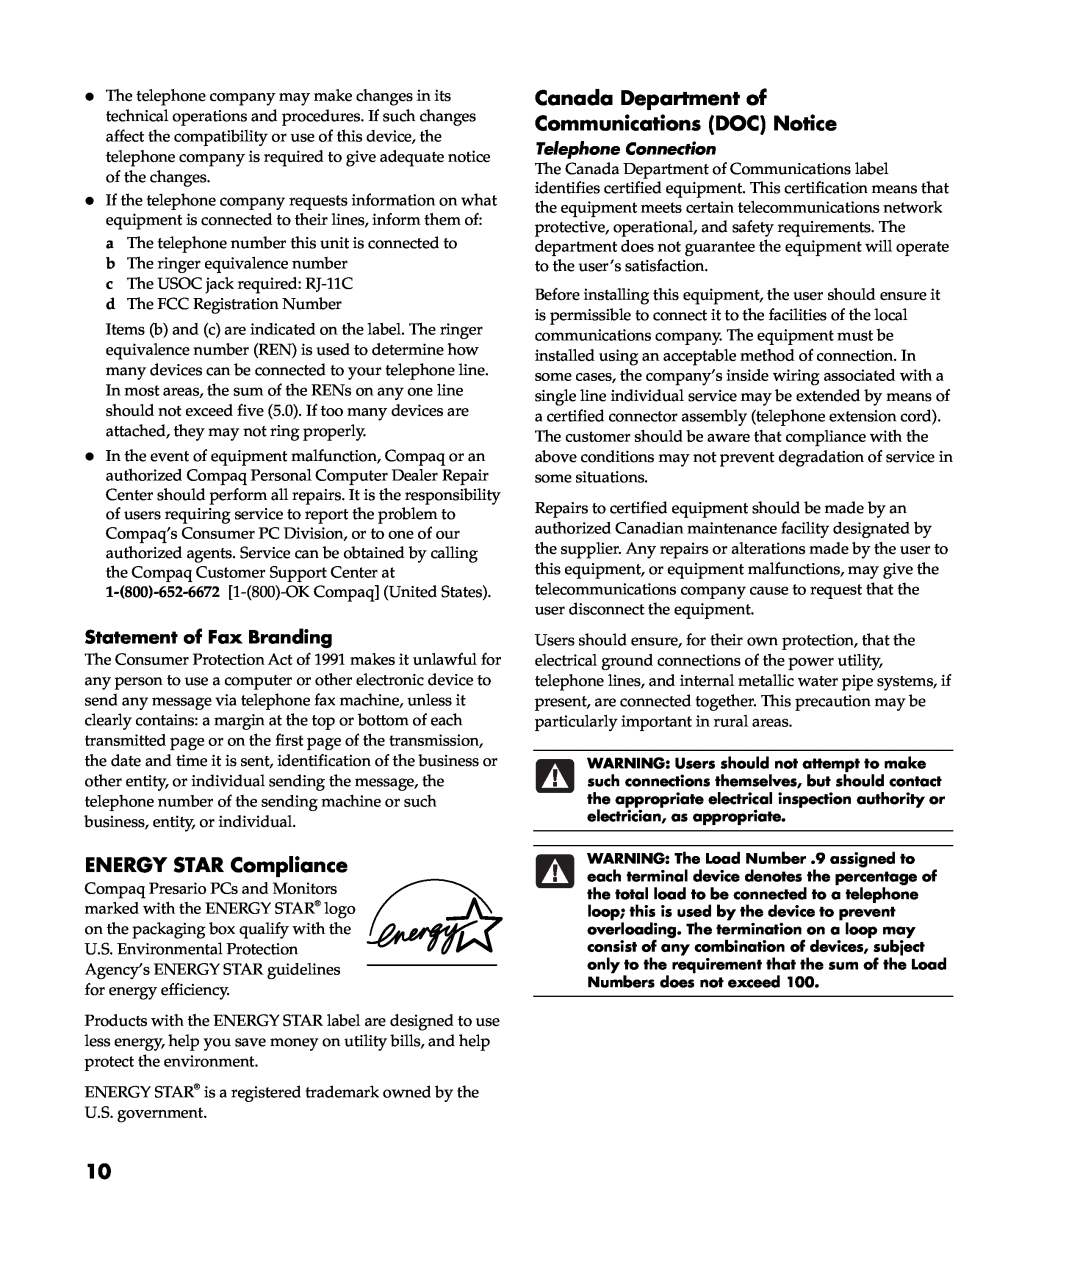 HP S6020WM, 8000T-P8655K ENERGY STAR Compliance, Canada Department of Communications DOC Notice, Statement of Fax Branding 